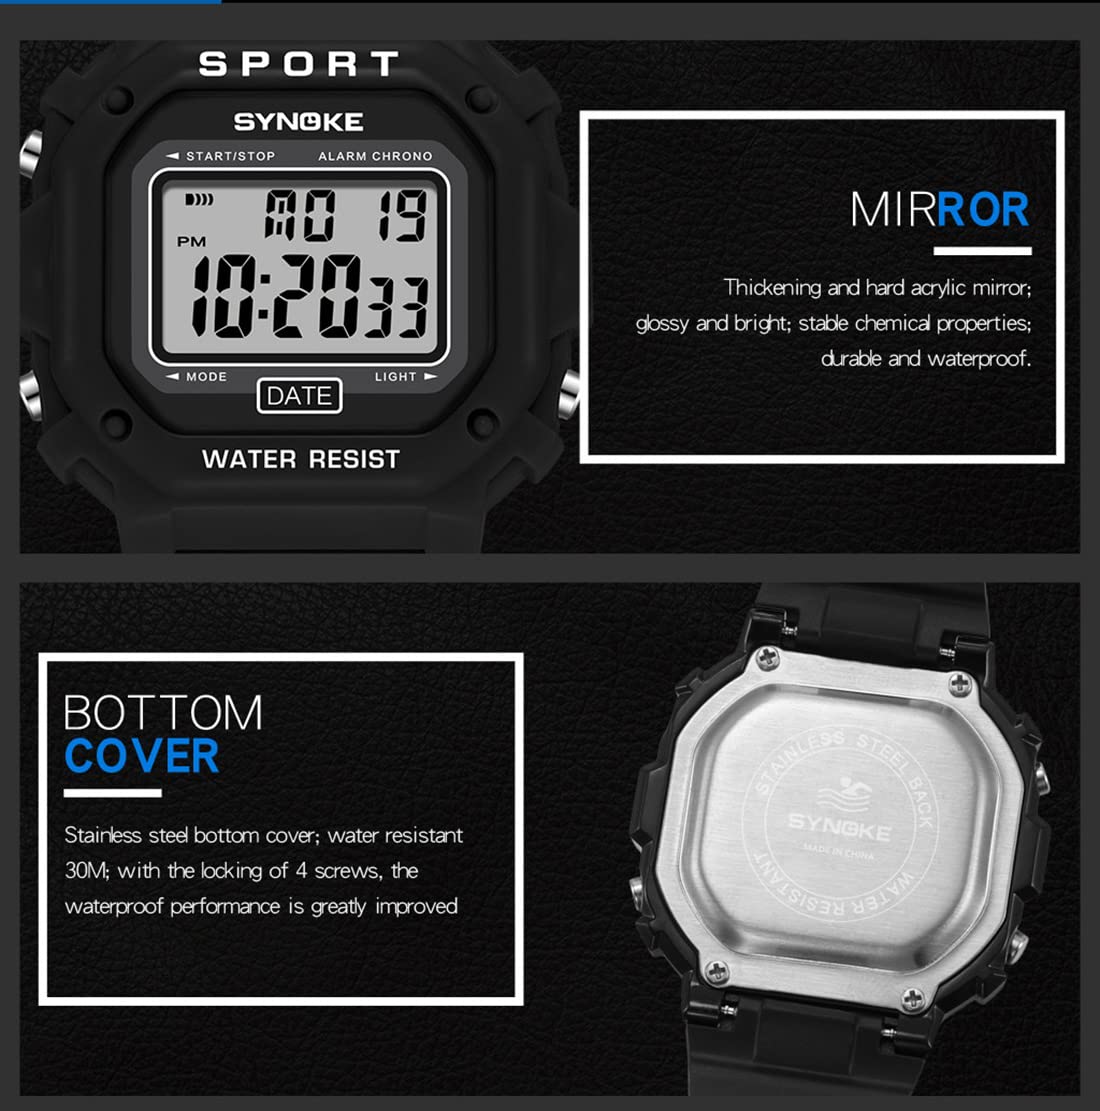 KINGNUOS Outdoor Sports Watches Unisex Digital Watch Couple Watches Men Women Waterproof LED Clock Square Electronic Student Wrist Watch